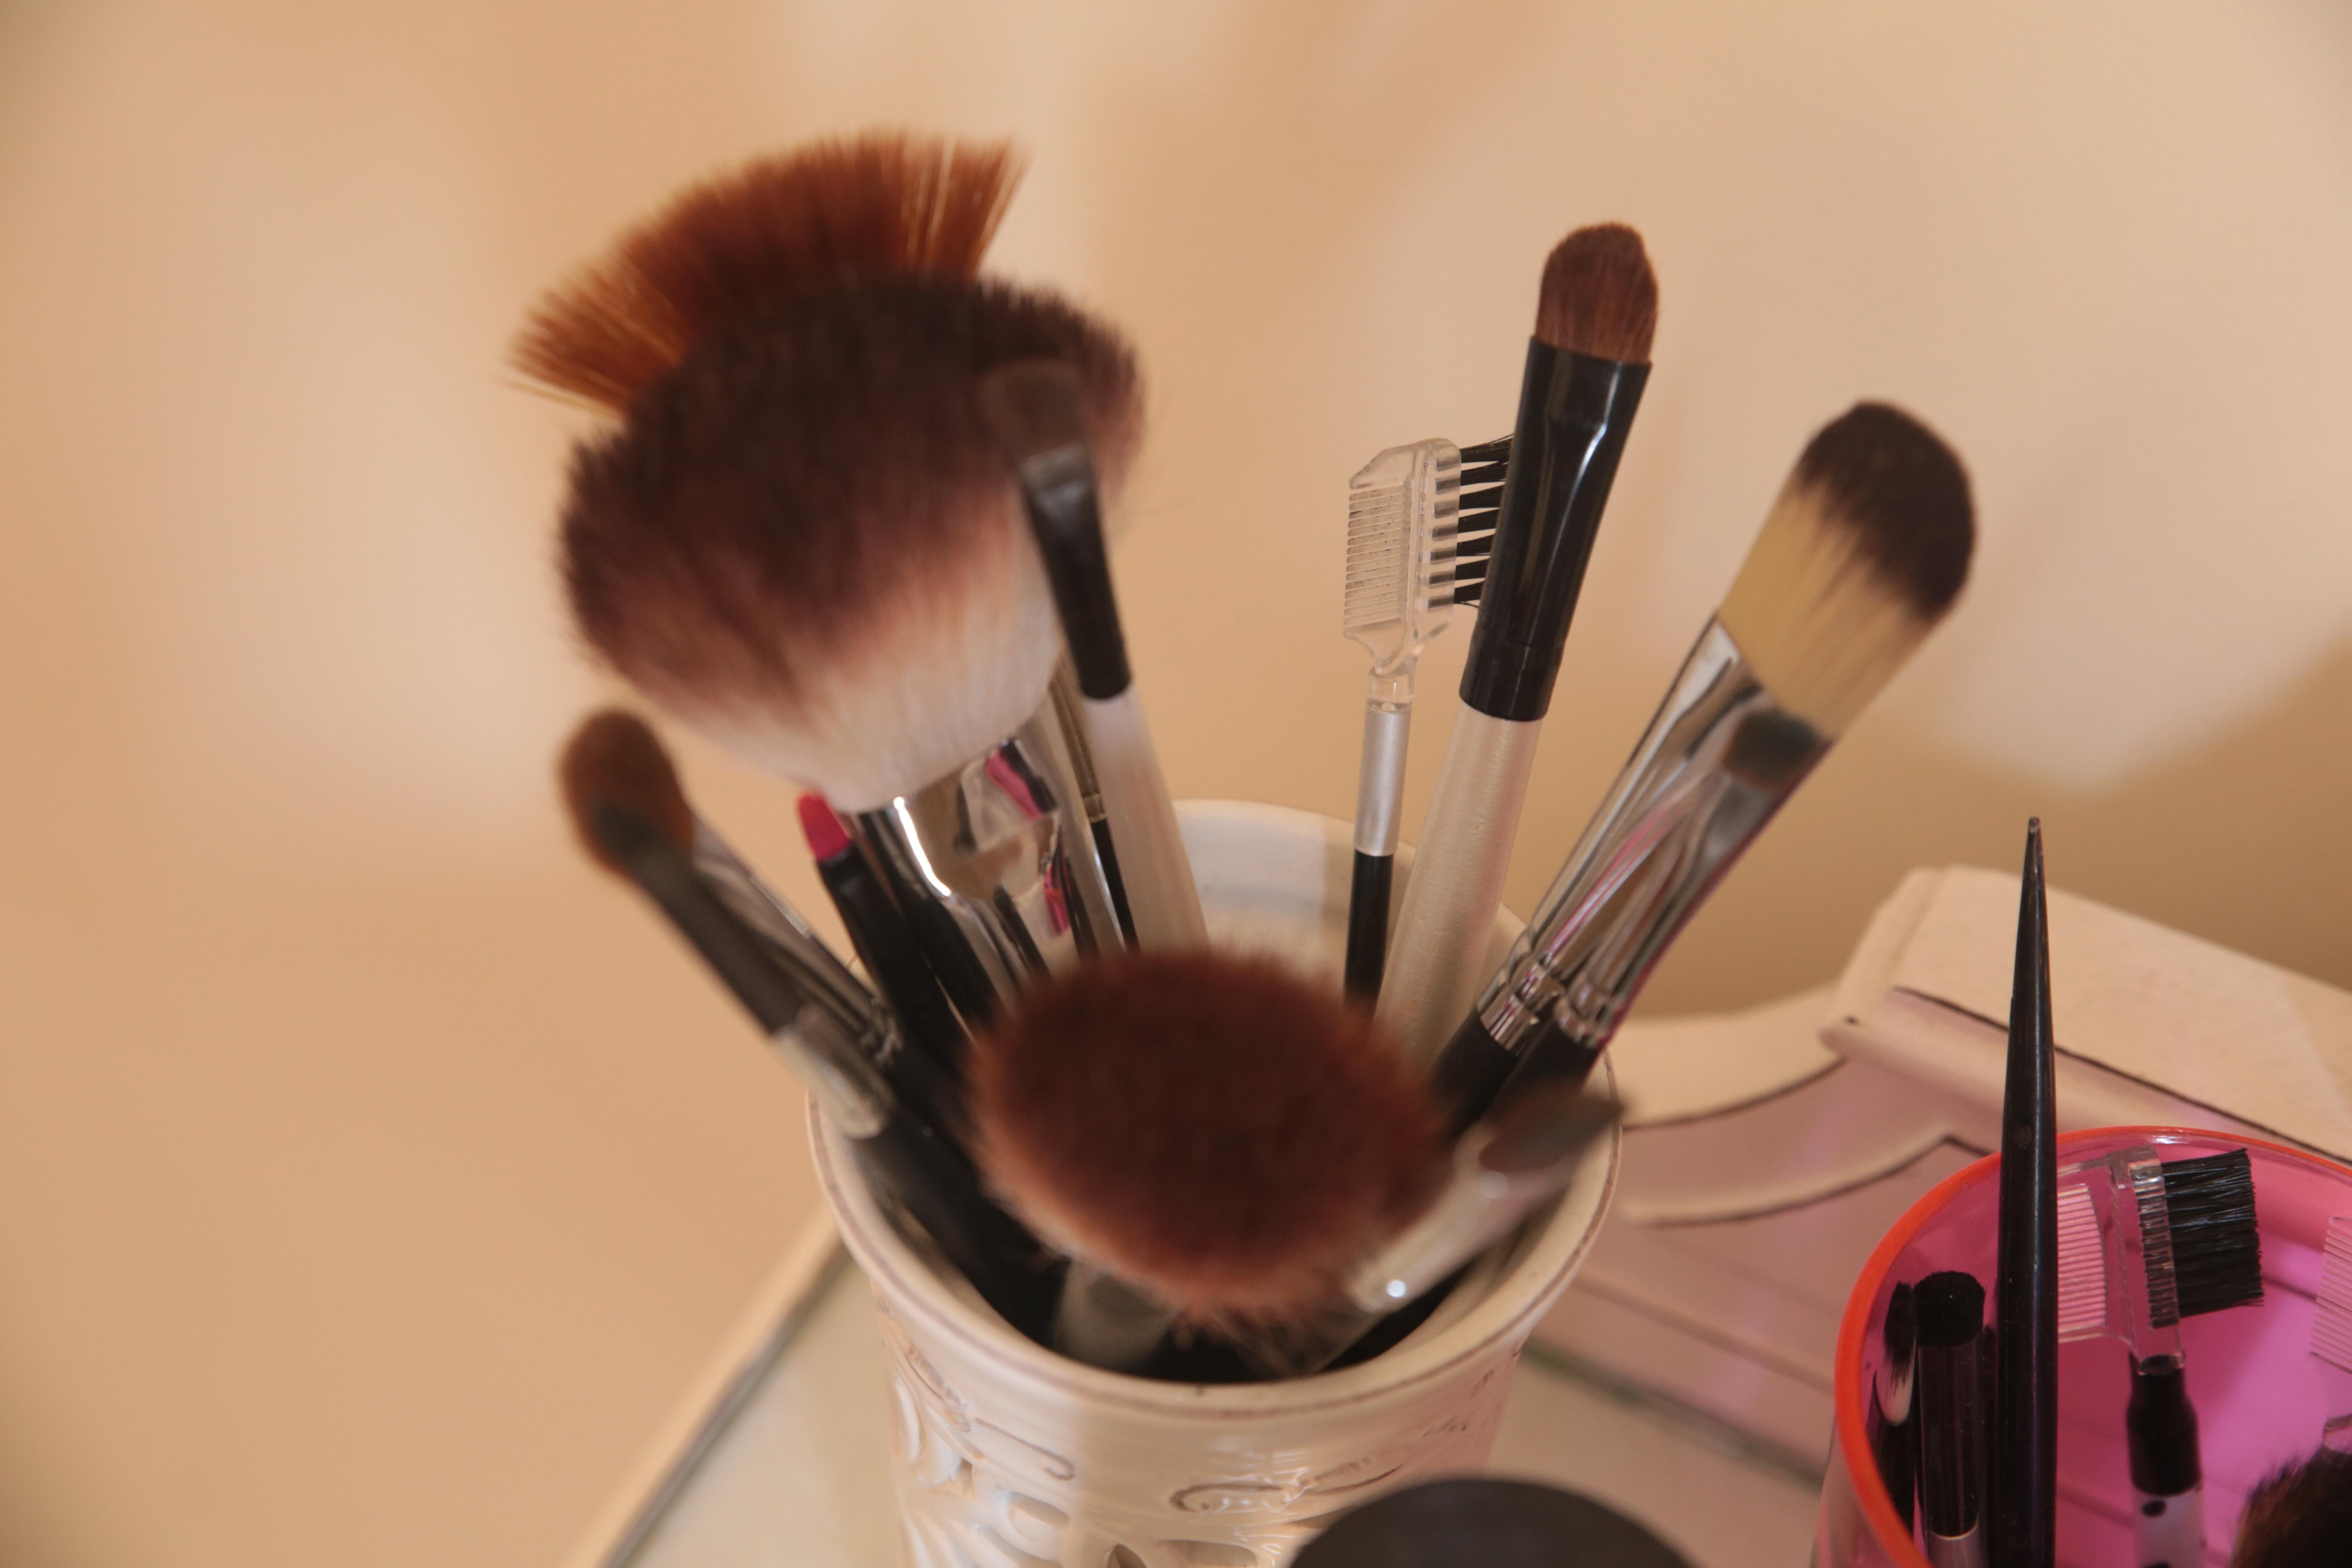 Clean your makeup brushes.